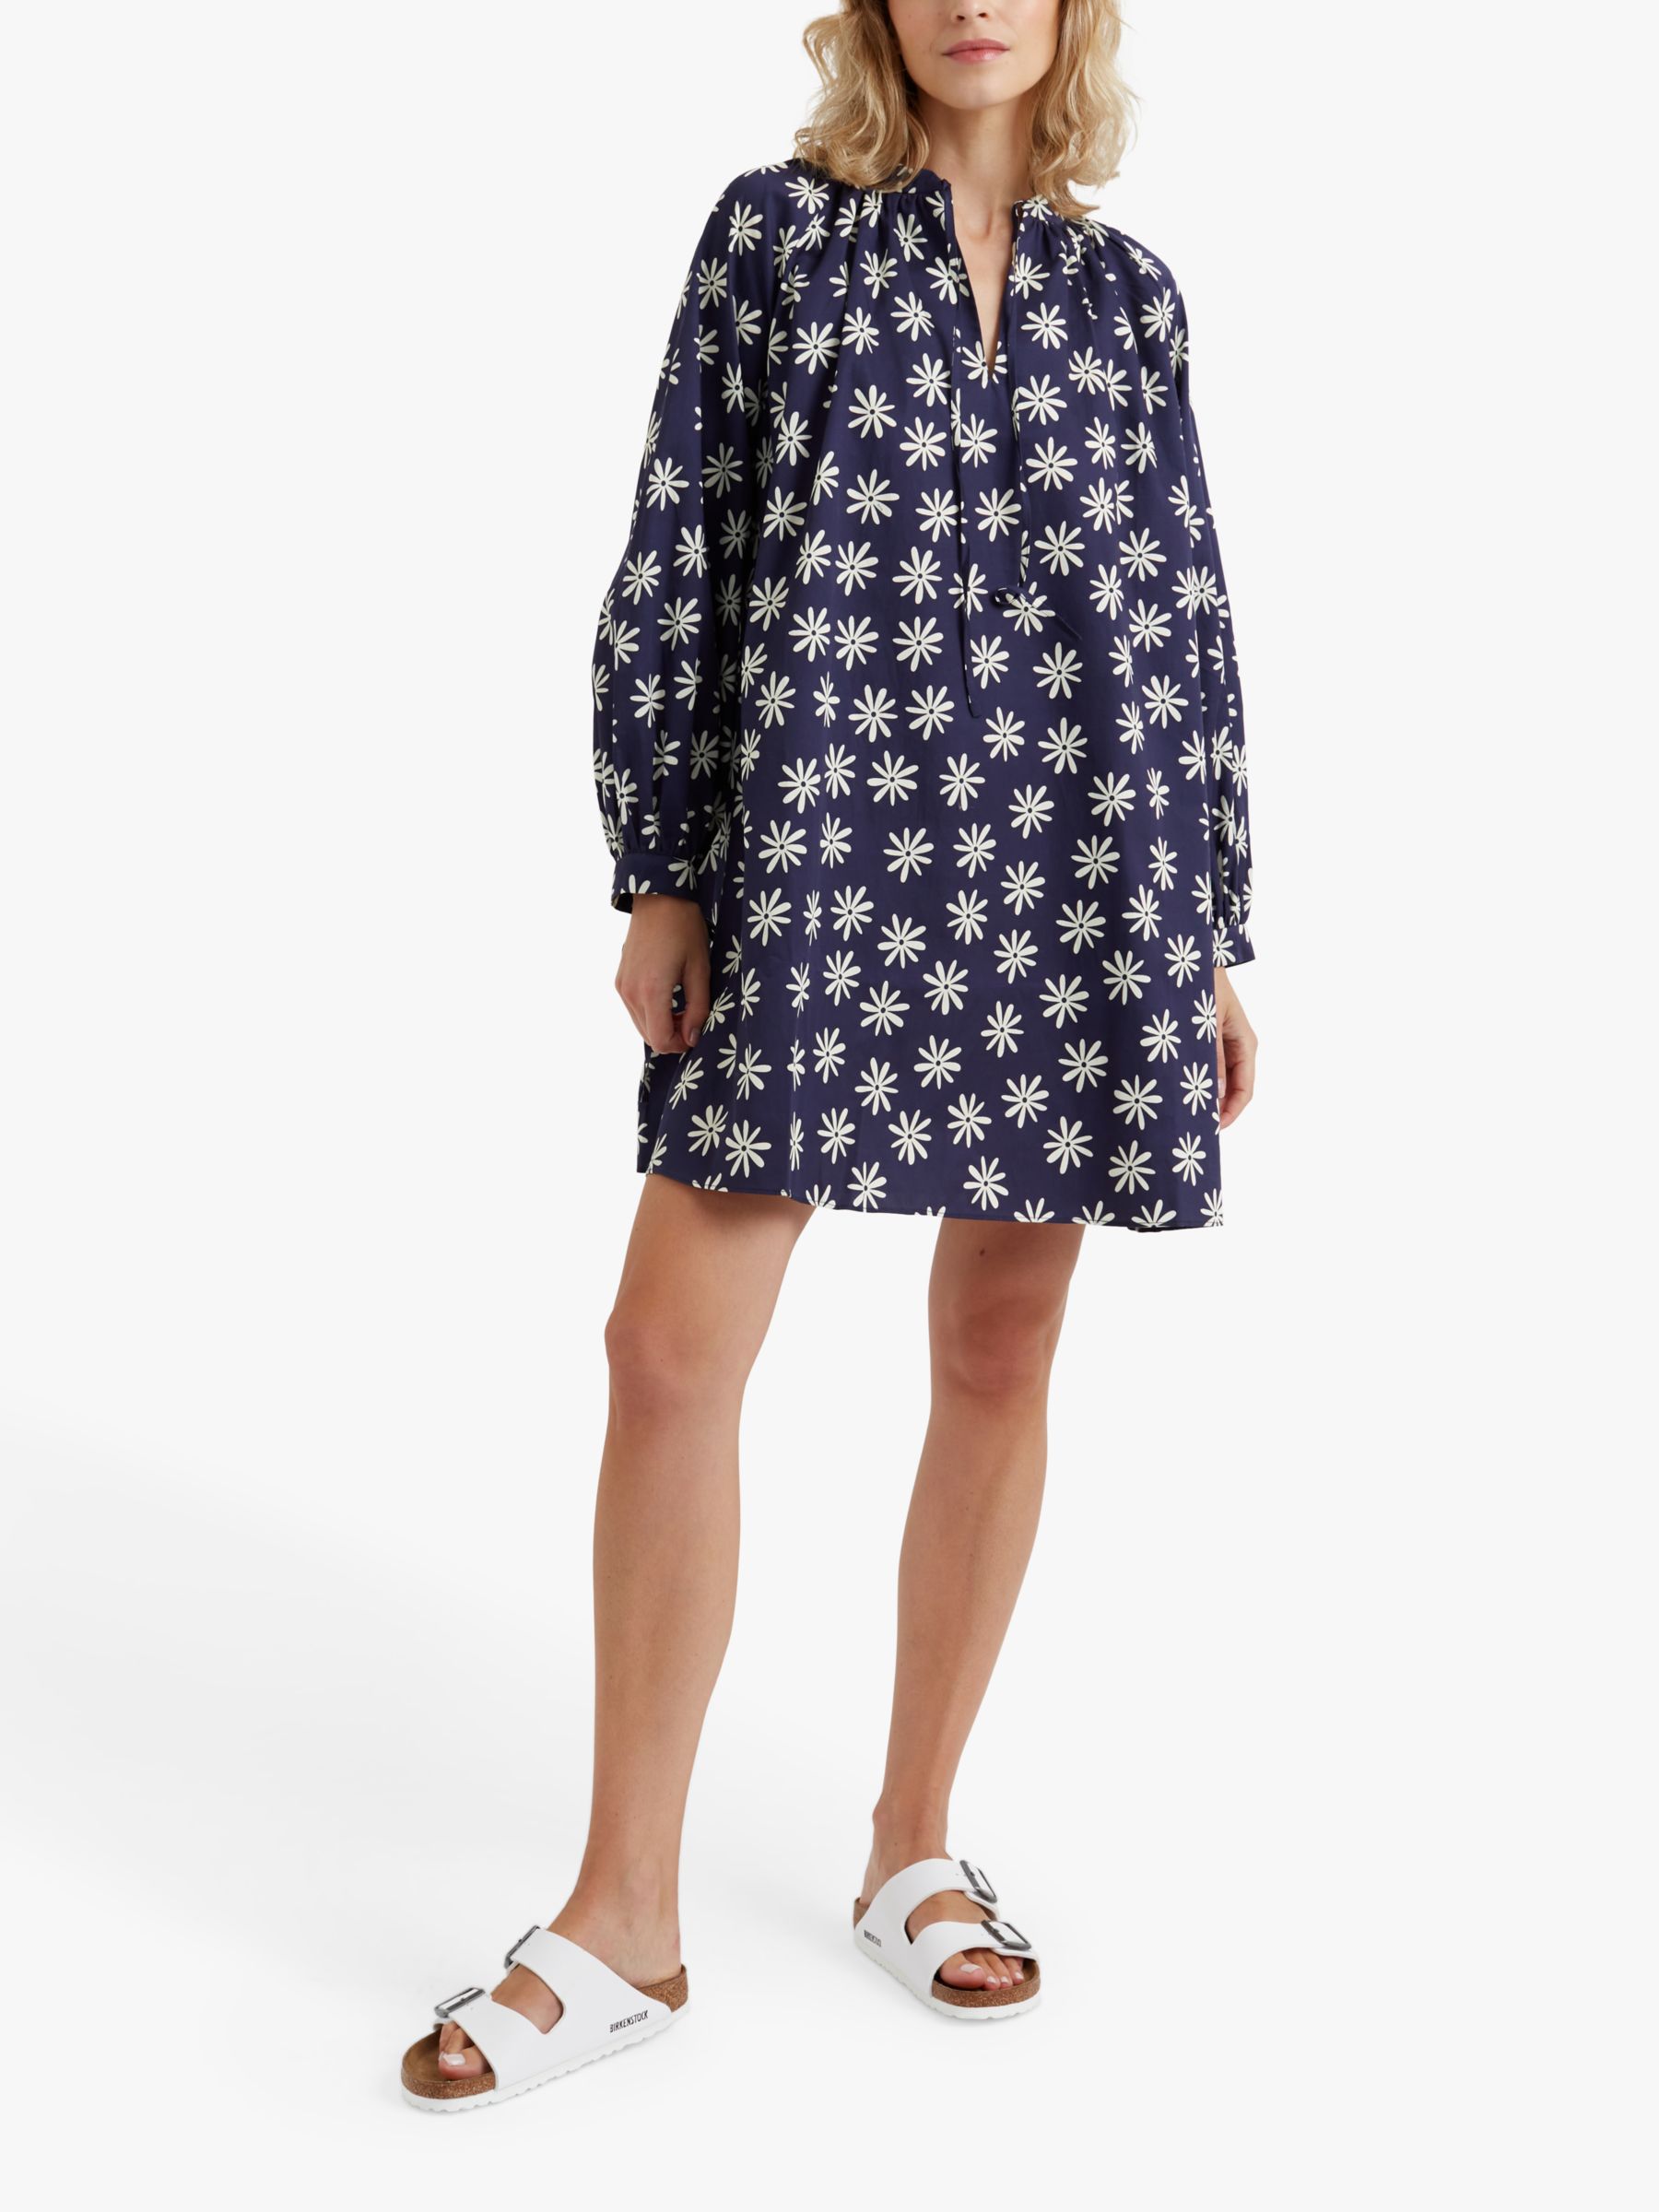 Chinti & Parker Ditsy Floral Shift Dress, Navy/Cream, 4